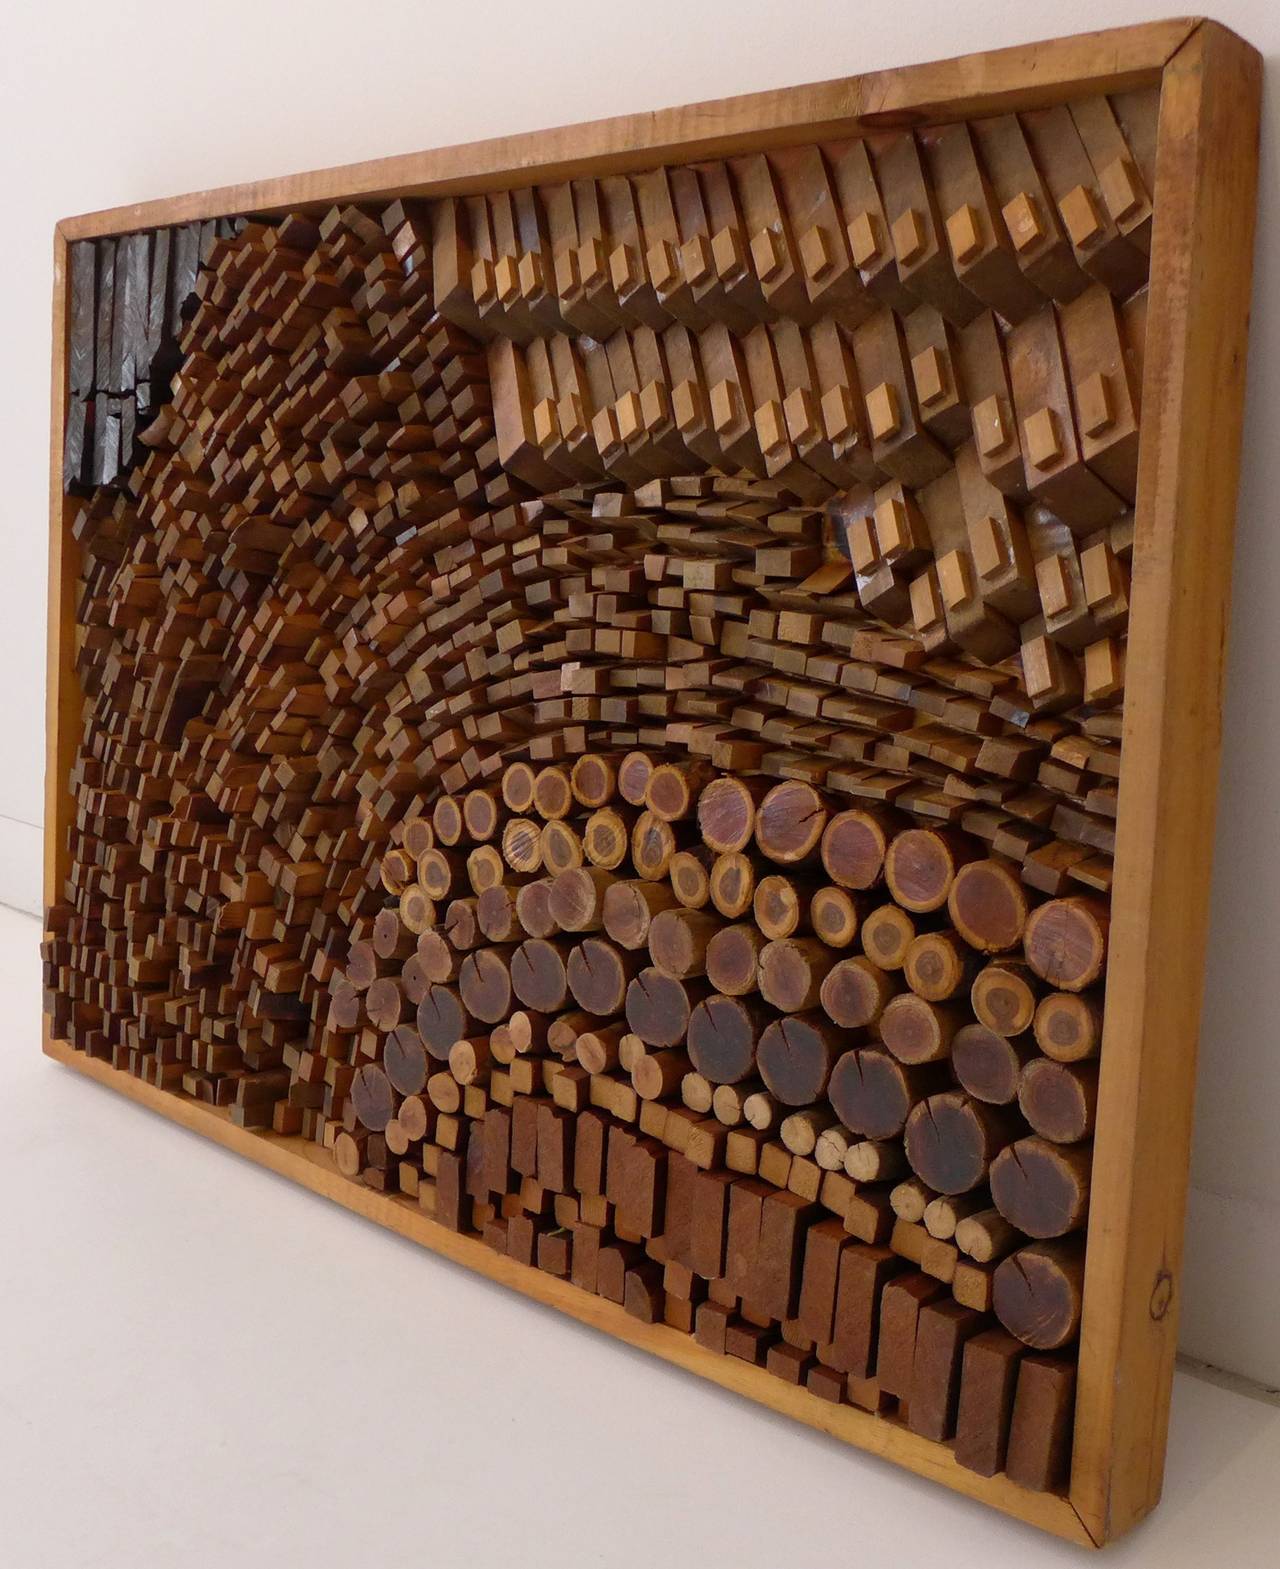 Abstract wall relief of sawn, stained, and collaged wood and found wood objects, by Lithuanian-born American artist Josef Twirbutt. A practicing architect as well as artist, Twirbutt arrived in New York City in 1959 and plugged into the Village art